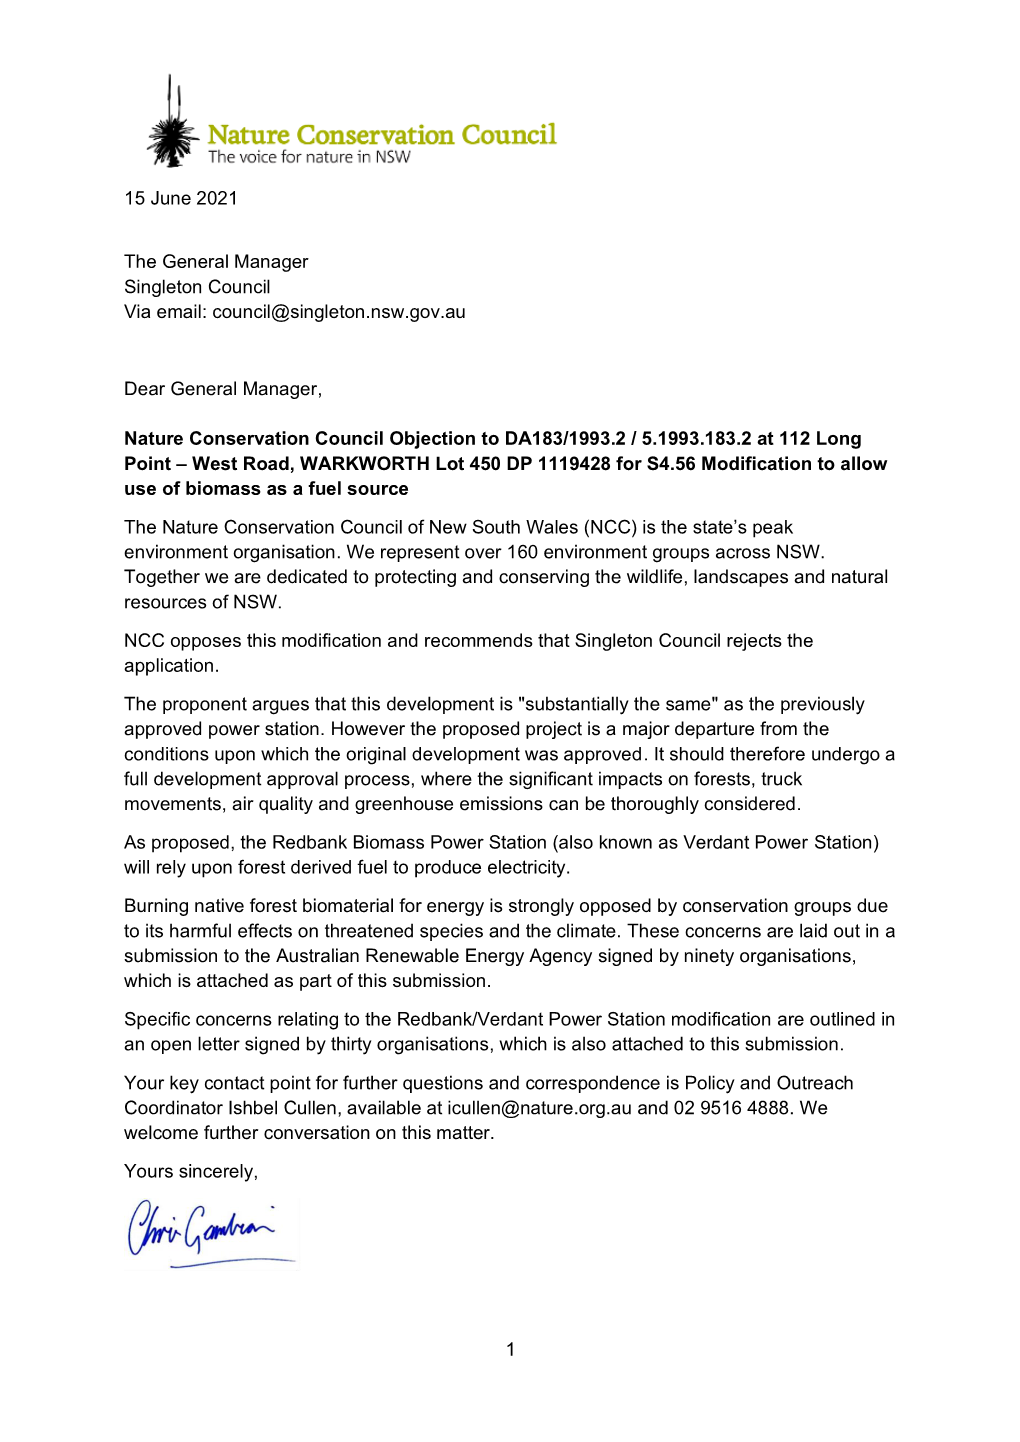 NCC Submission to Singleton Council RE: Redbank Biomass Power Station